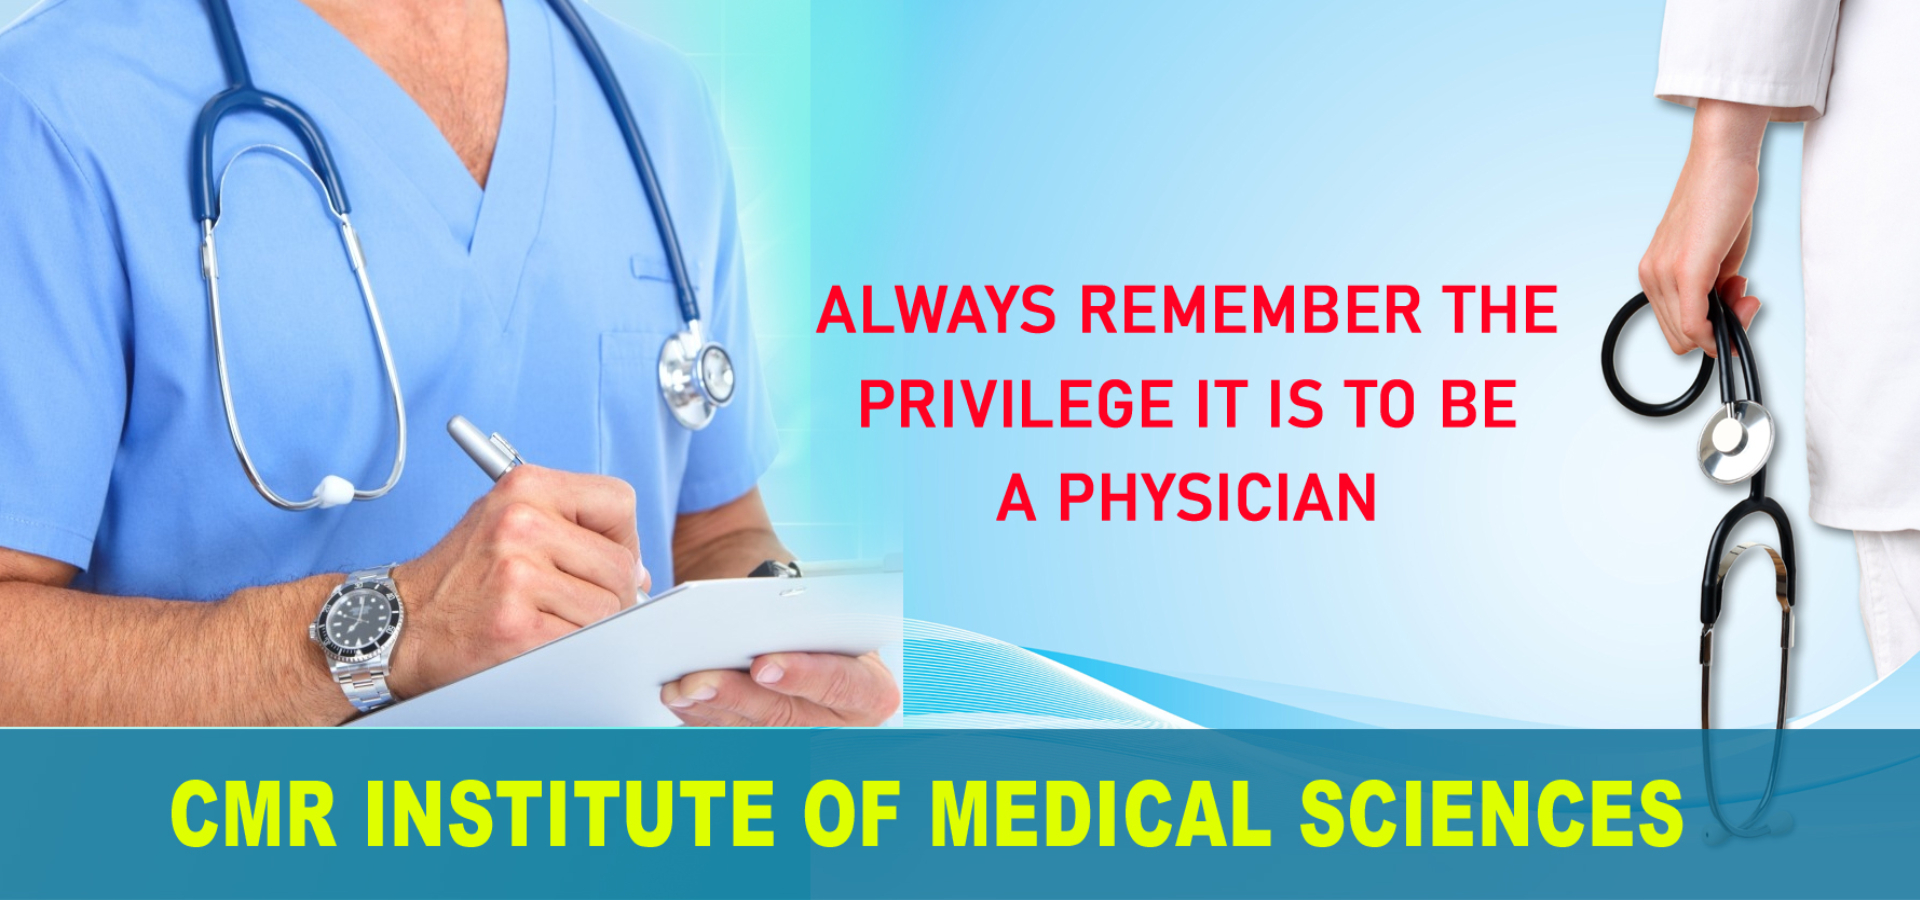 Top paramedical colleges in Hyderabad